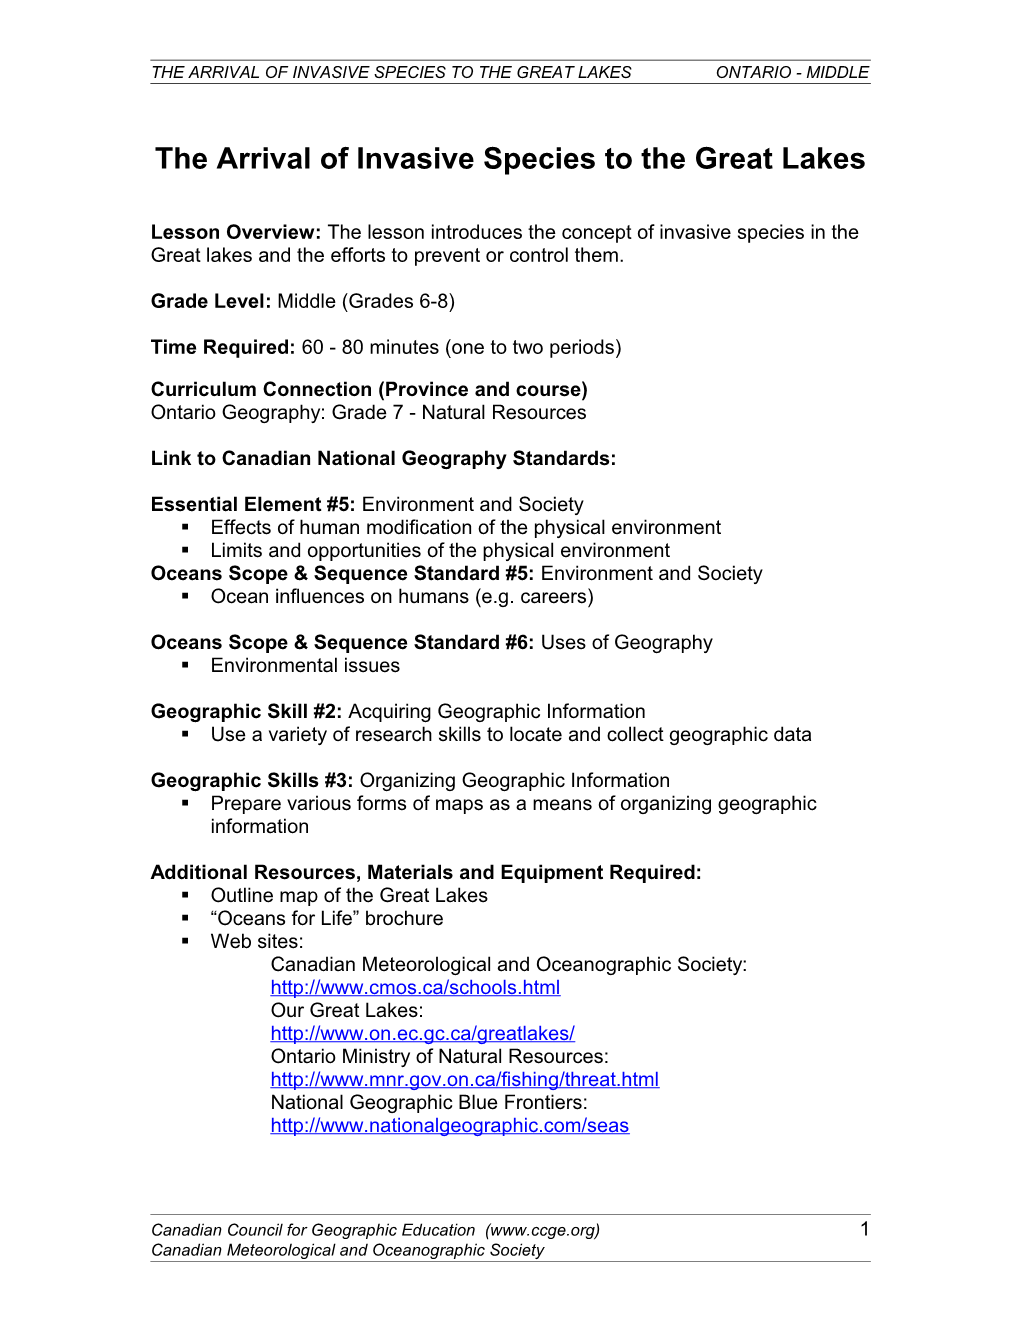 The Arrival of Invasive Species to the Great Lakes